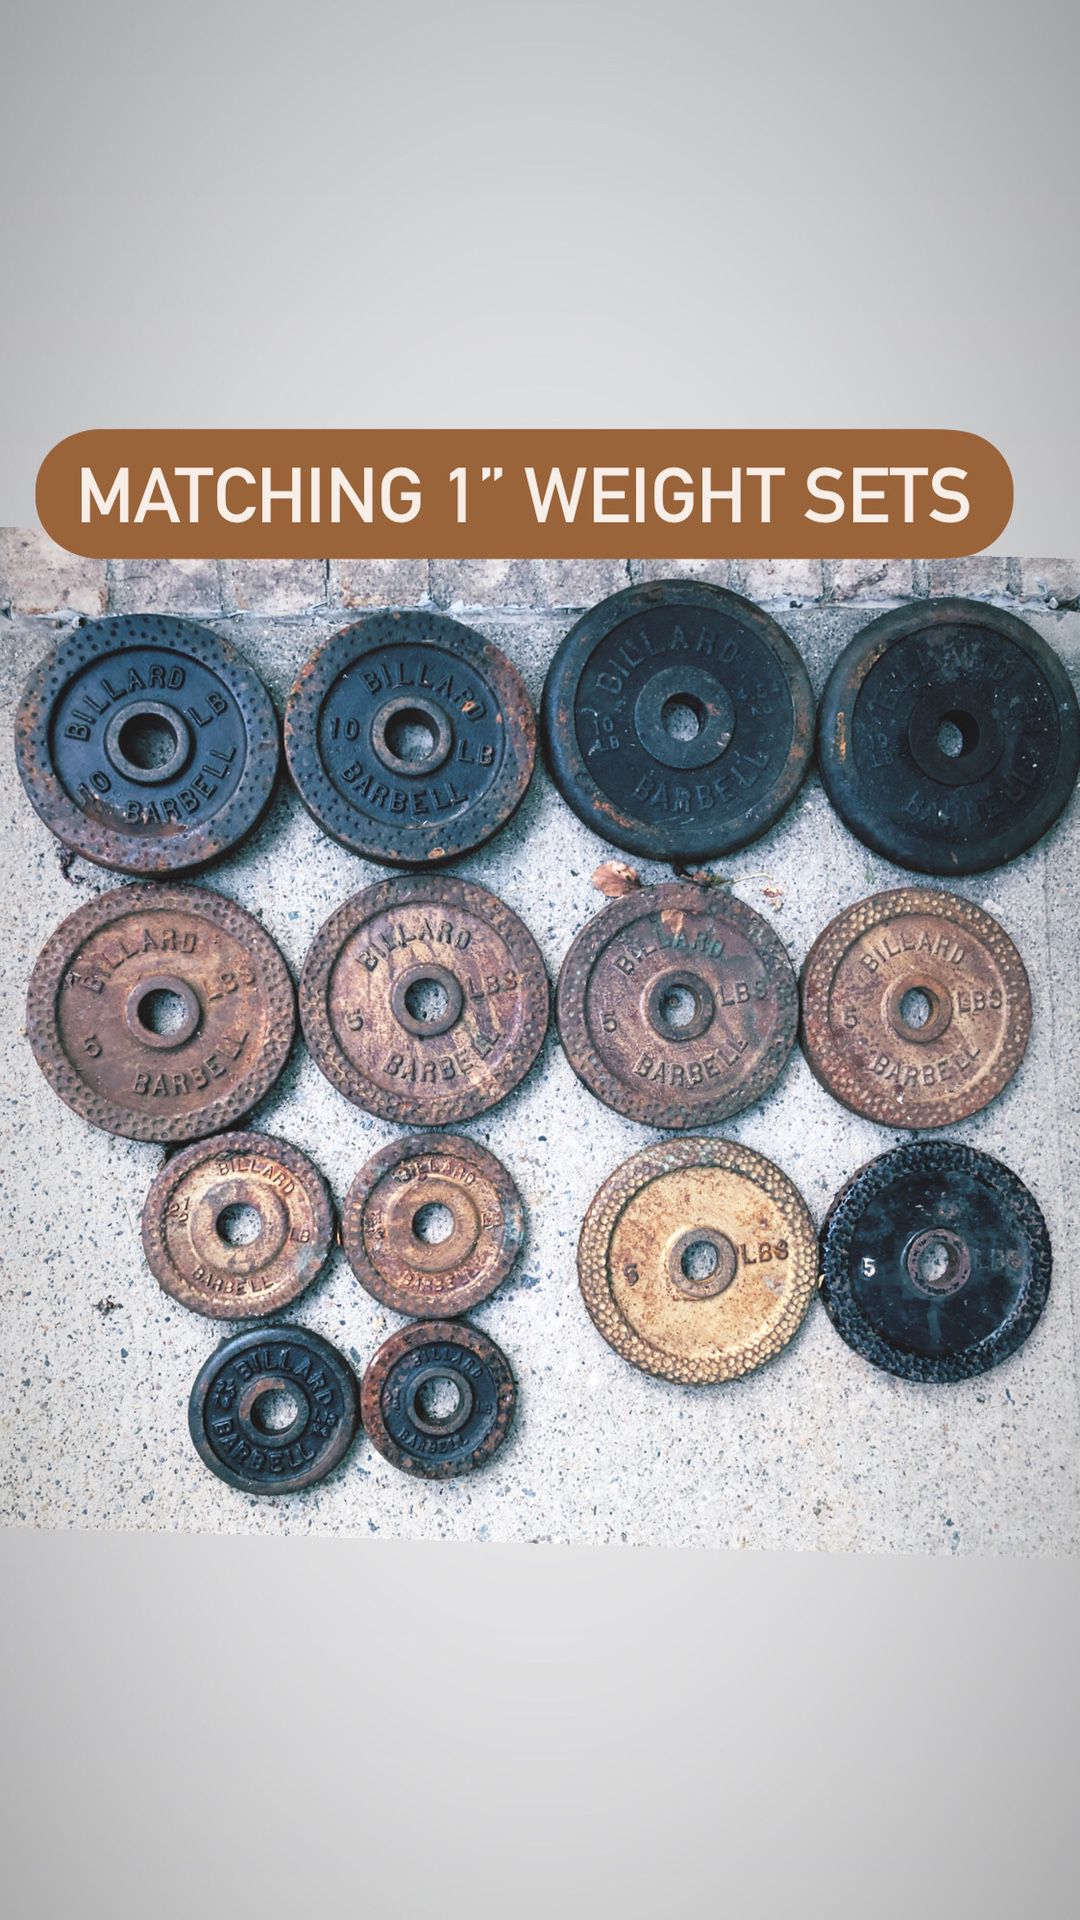 Pairs of matching 1” weights (read description) and barbells curl bars and dumbbell handles dumbell clips